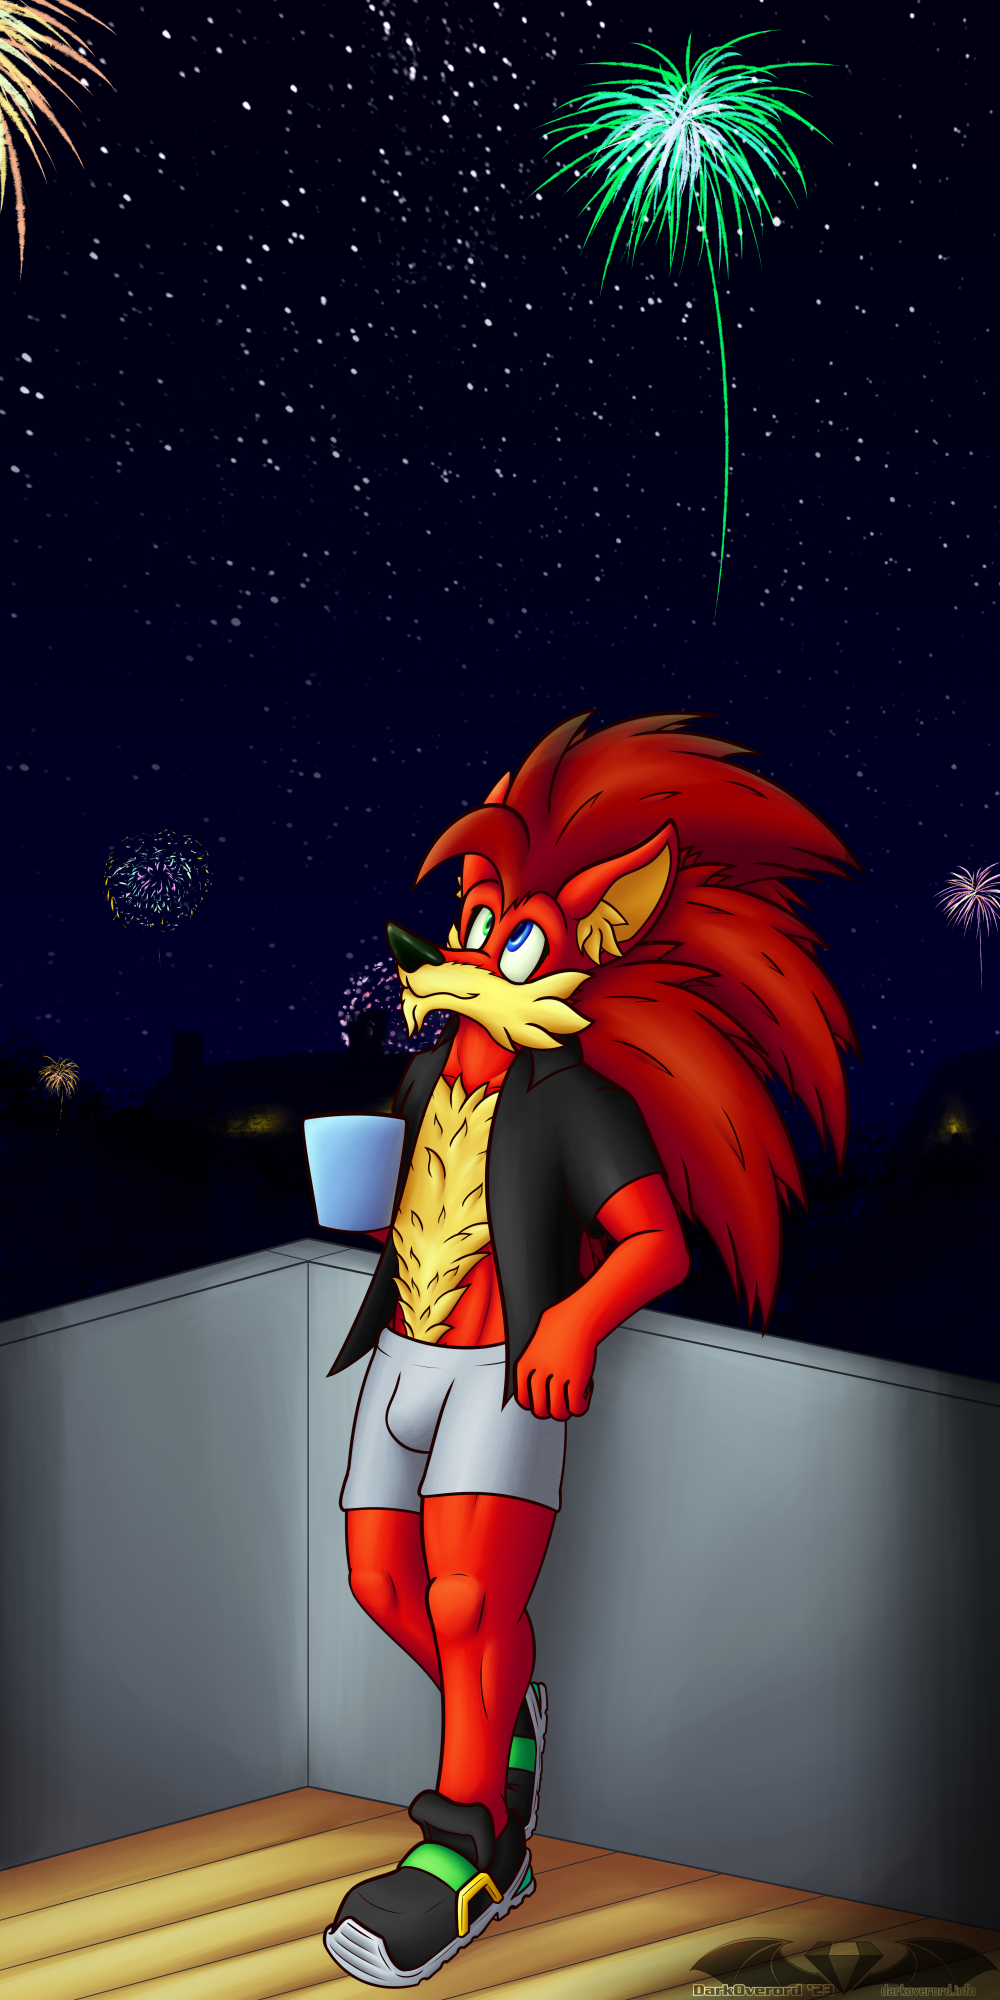 A red hedgehog, Simon, in just an open shirt and boxers leaning against a balcony wall while looking up in to the sky as fireworks go off. They're illuminated by a light source from the building their balcony is on.